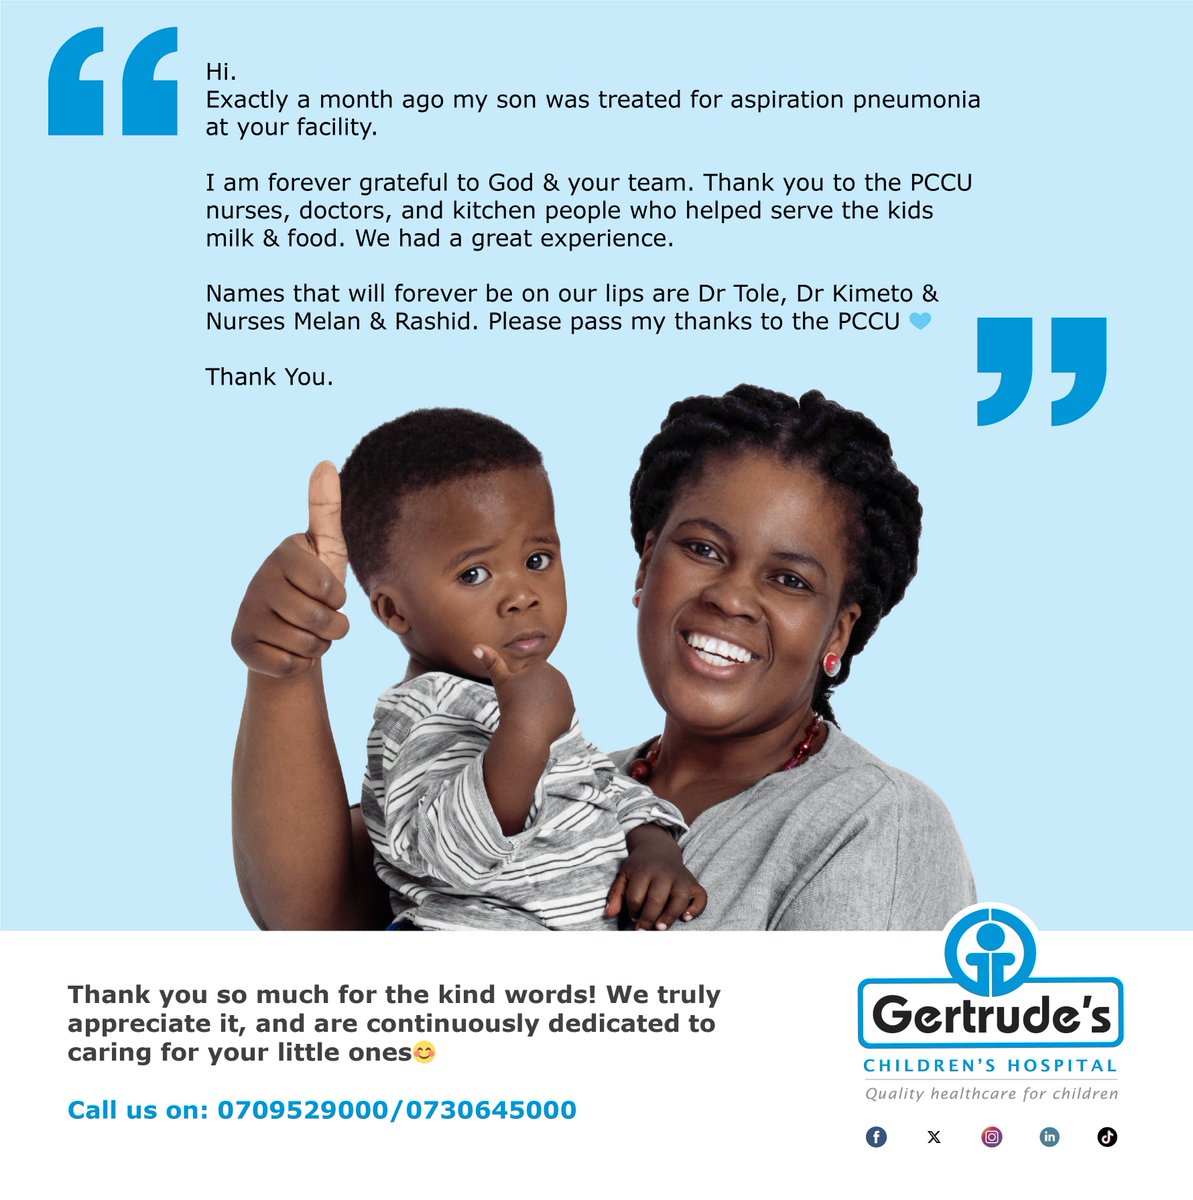 Gratitude fills our hearts as we read the positive reviews left by our wonderful clients. Your support means the world to us, and we're dedicated to delivering the best care possible for every child who walks through our doors. Thank you for choosing @GertrudesHosp! ❤️